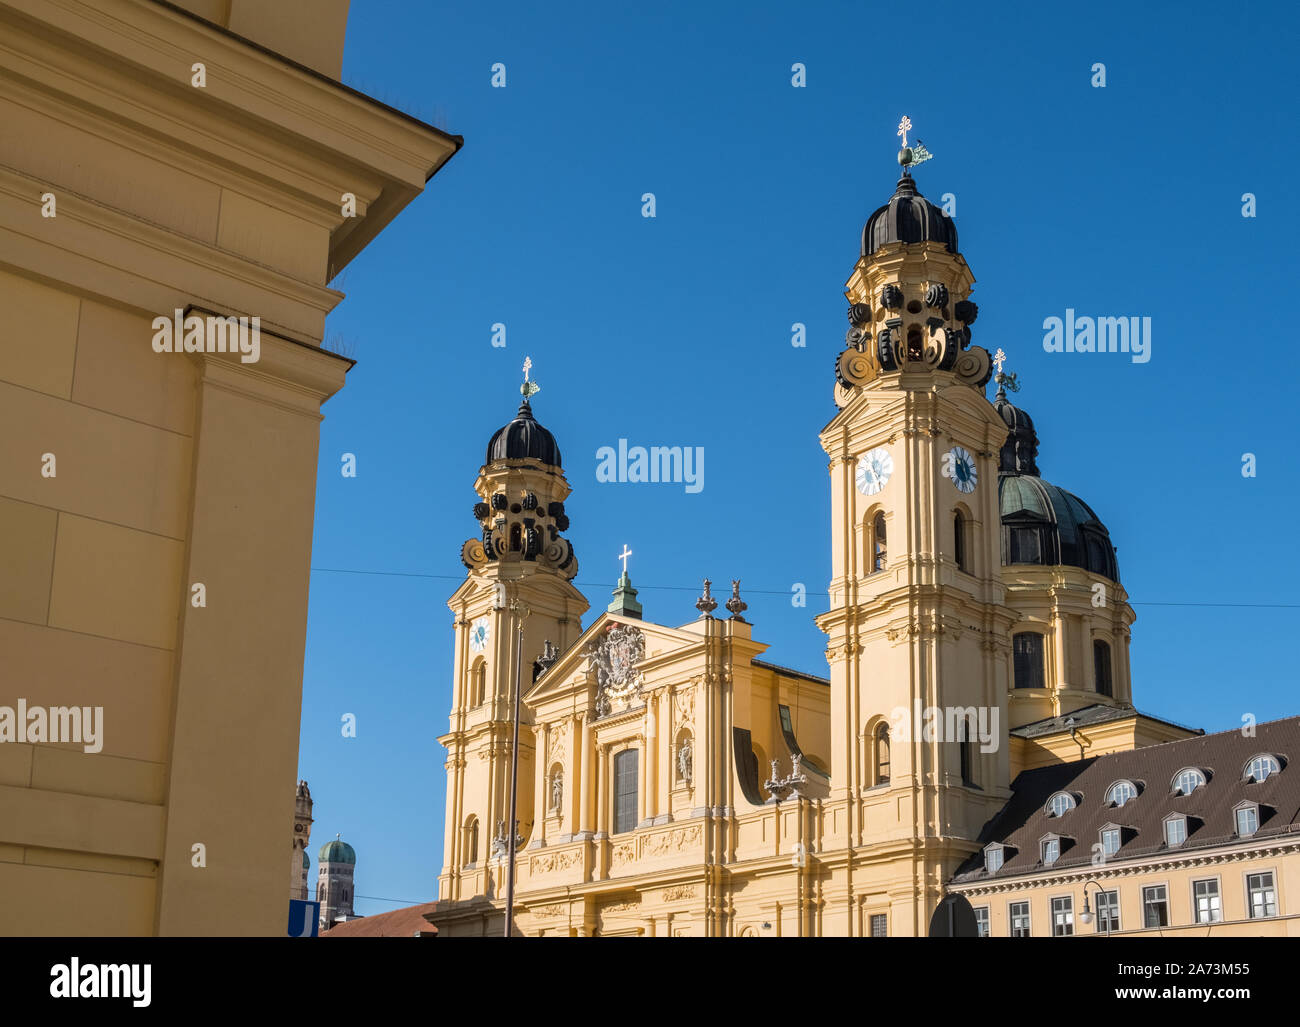 Old Town, Munich, Germany. Landmark domes of yellow building Theatine Church, a Roman Catholic church with a baroque architecture exterior. Stock Photo